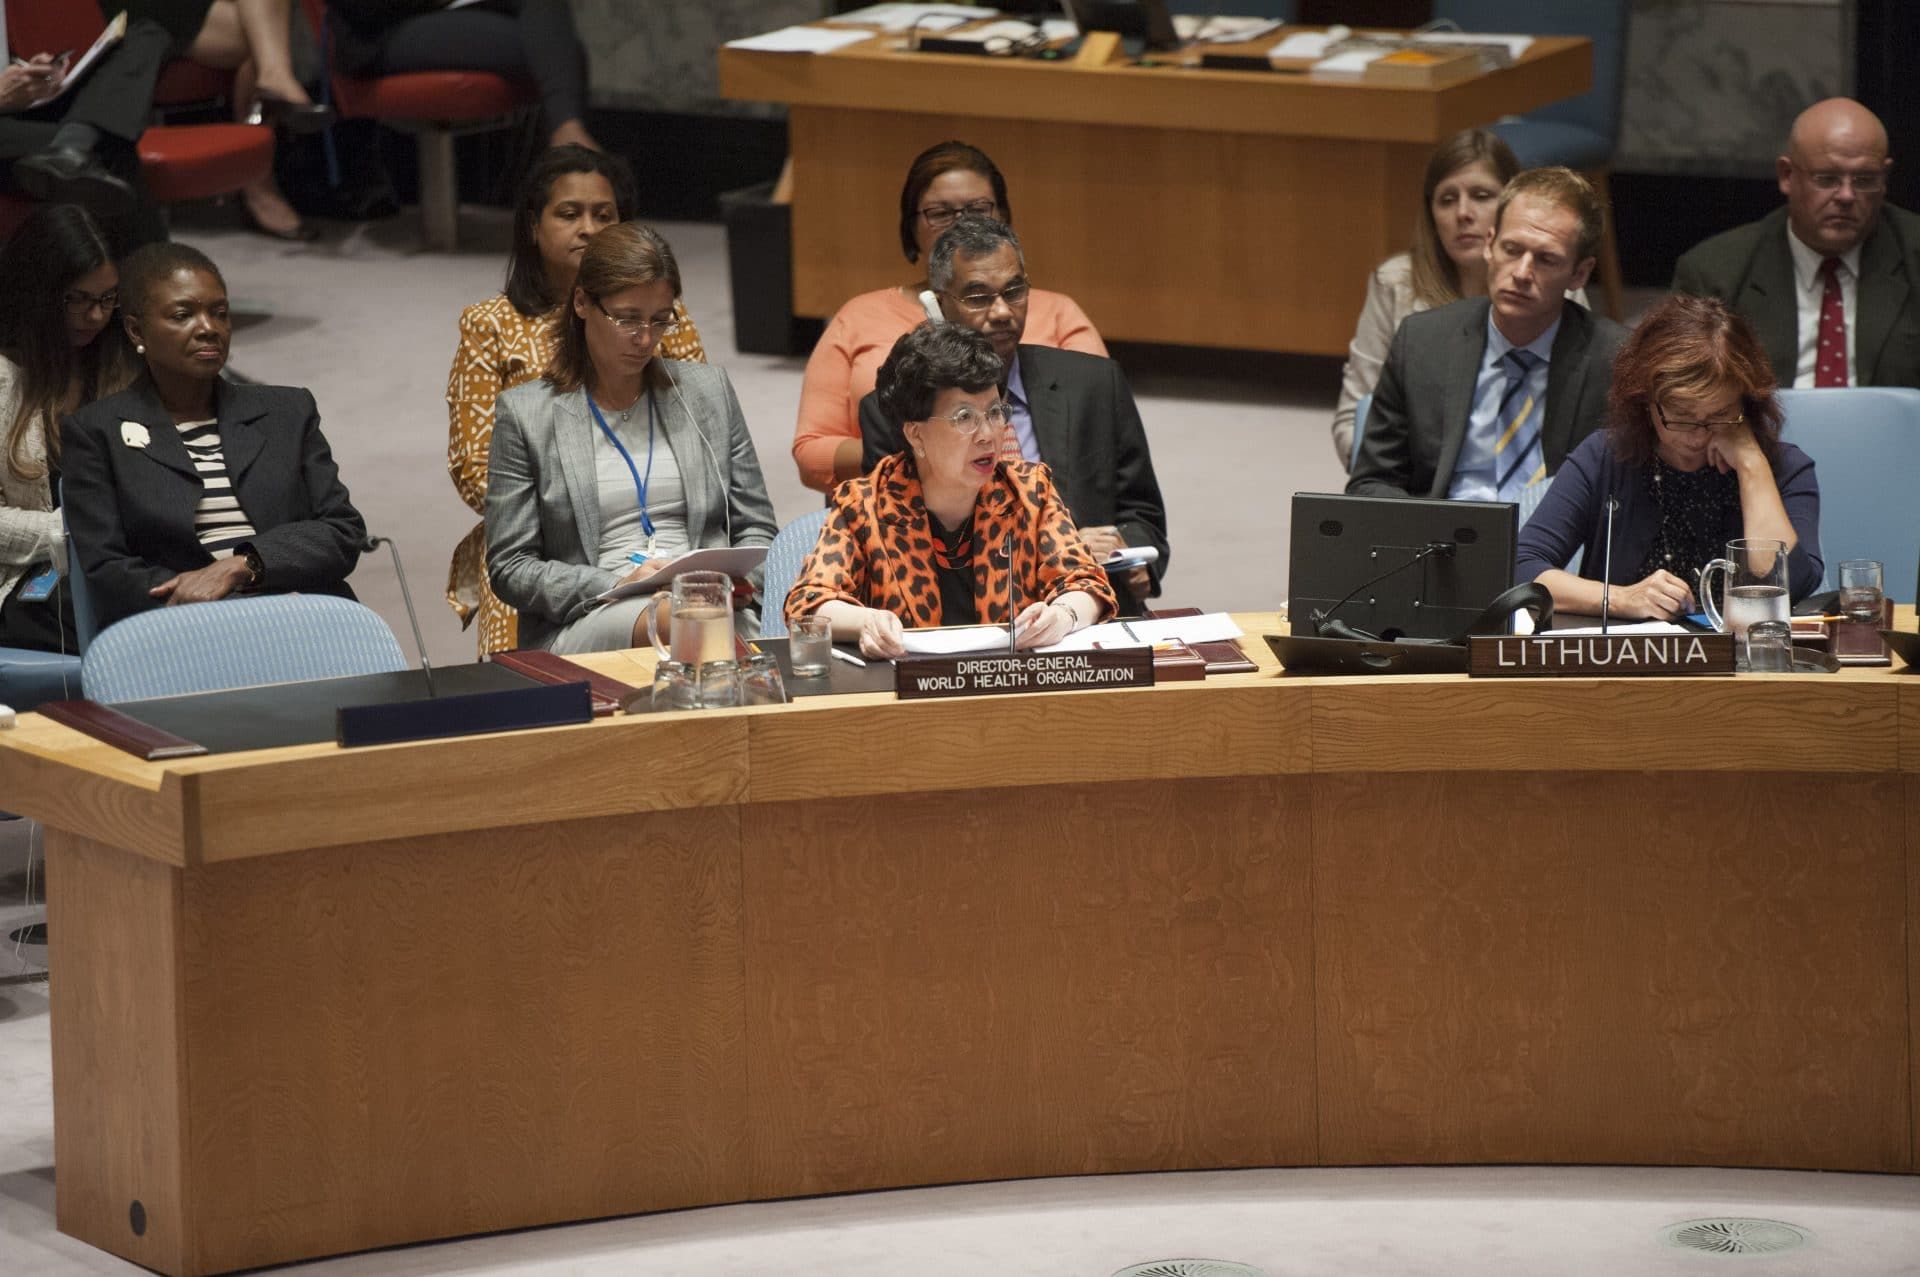 On September 18, 2014, Margaret Chan became the first WHO Director-General to address the UN Security Council for its consideration of the Ebola epidemic, which she described as "the greatest peacetime challenge that the United Nations and its agencies have ever faced." (UN Photo/Cia Pak)